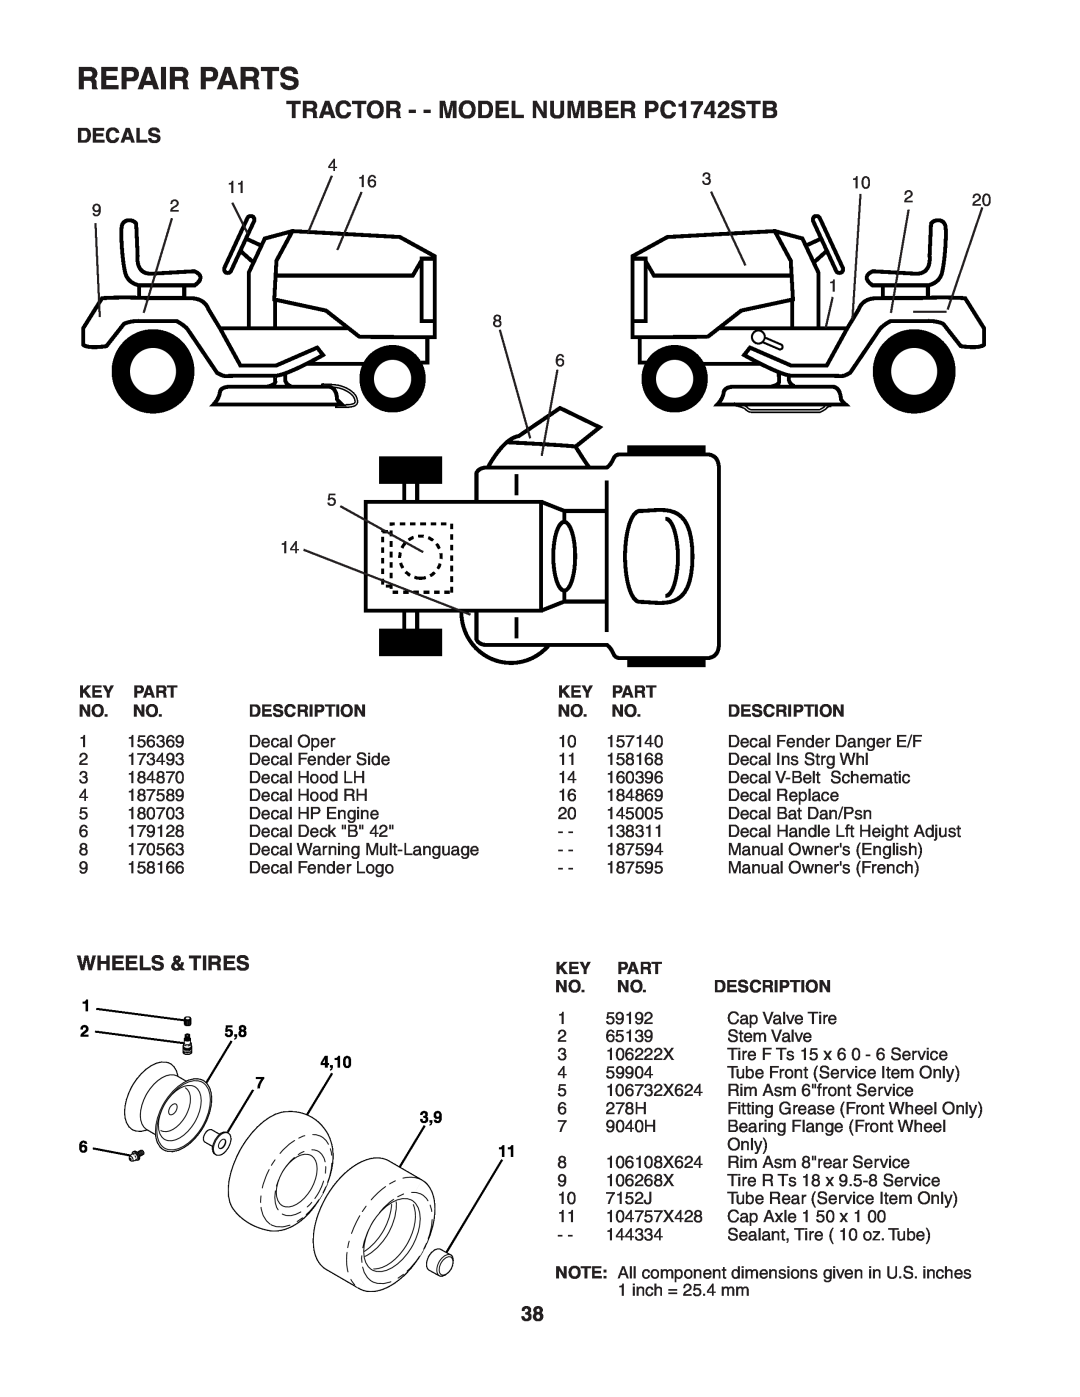 Poulan 187594 manual Decals, Wheels & Tires, Repair Parts, TRACTOR - - MODEL NUMBER PC1742STB 